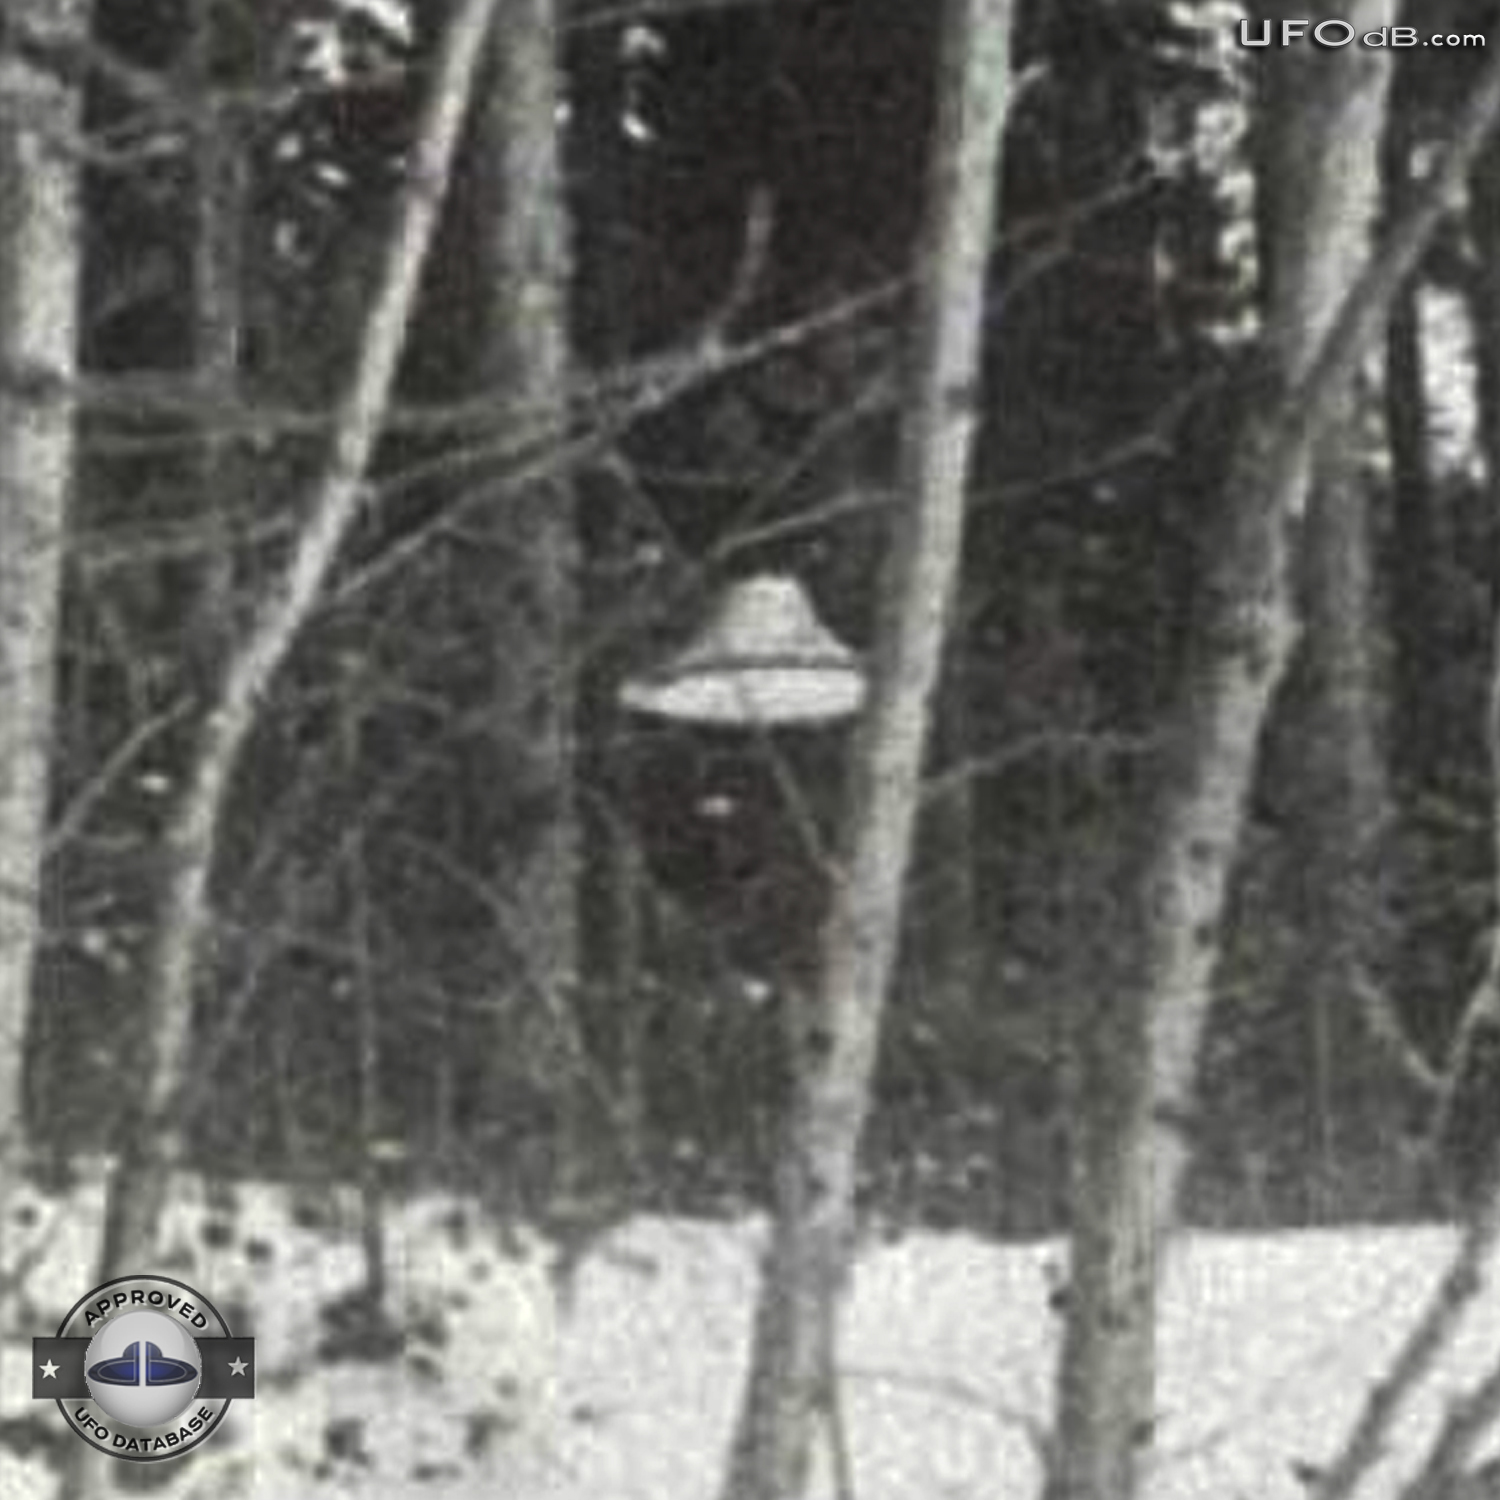 Suonenjoki UFO probe going around trees in the forest | March 16 1979 UFO Picture #336-6